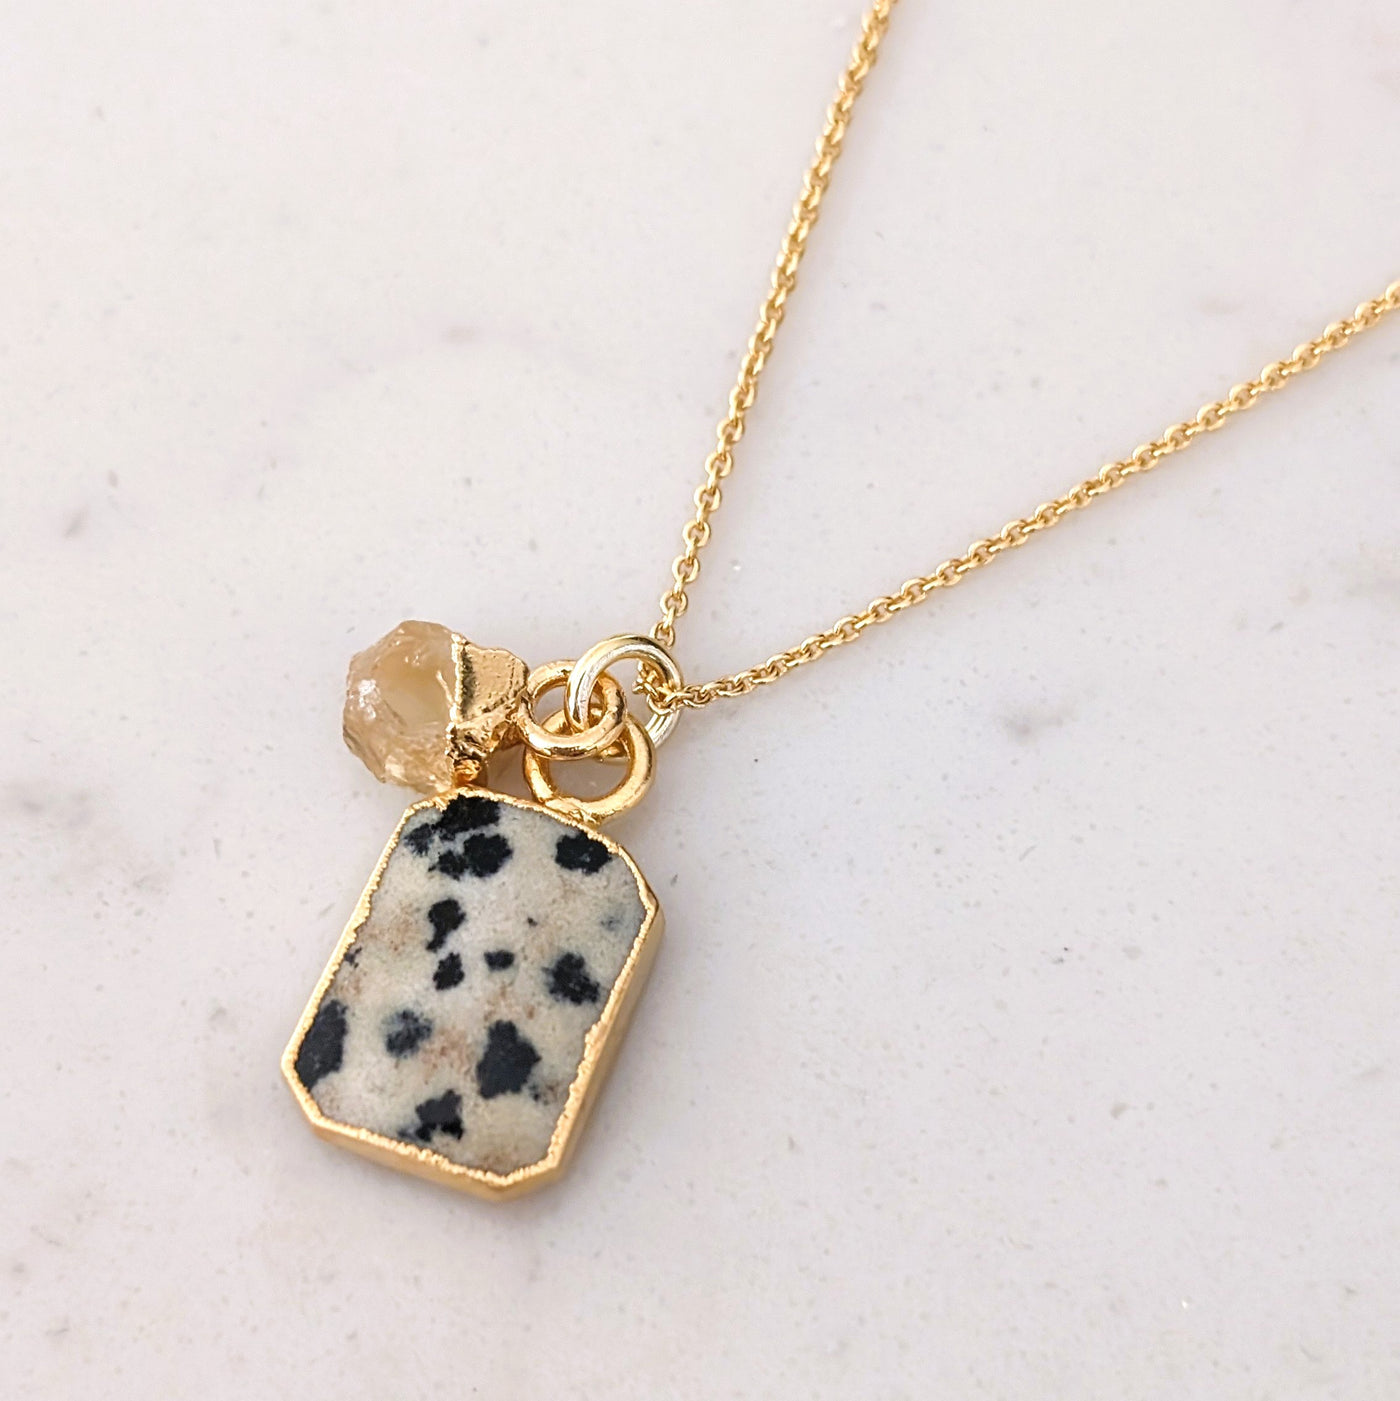 Dalmatian Jasper and Citrine gold plated necklace